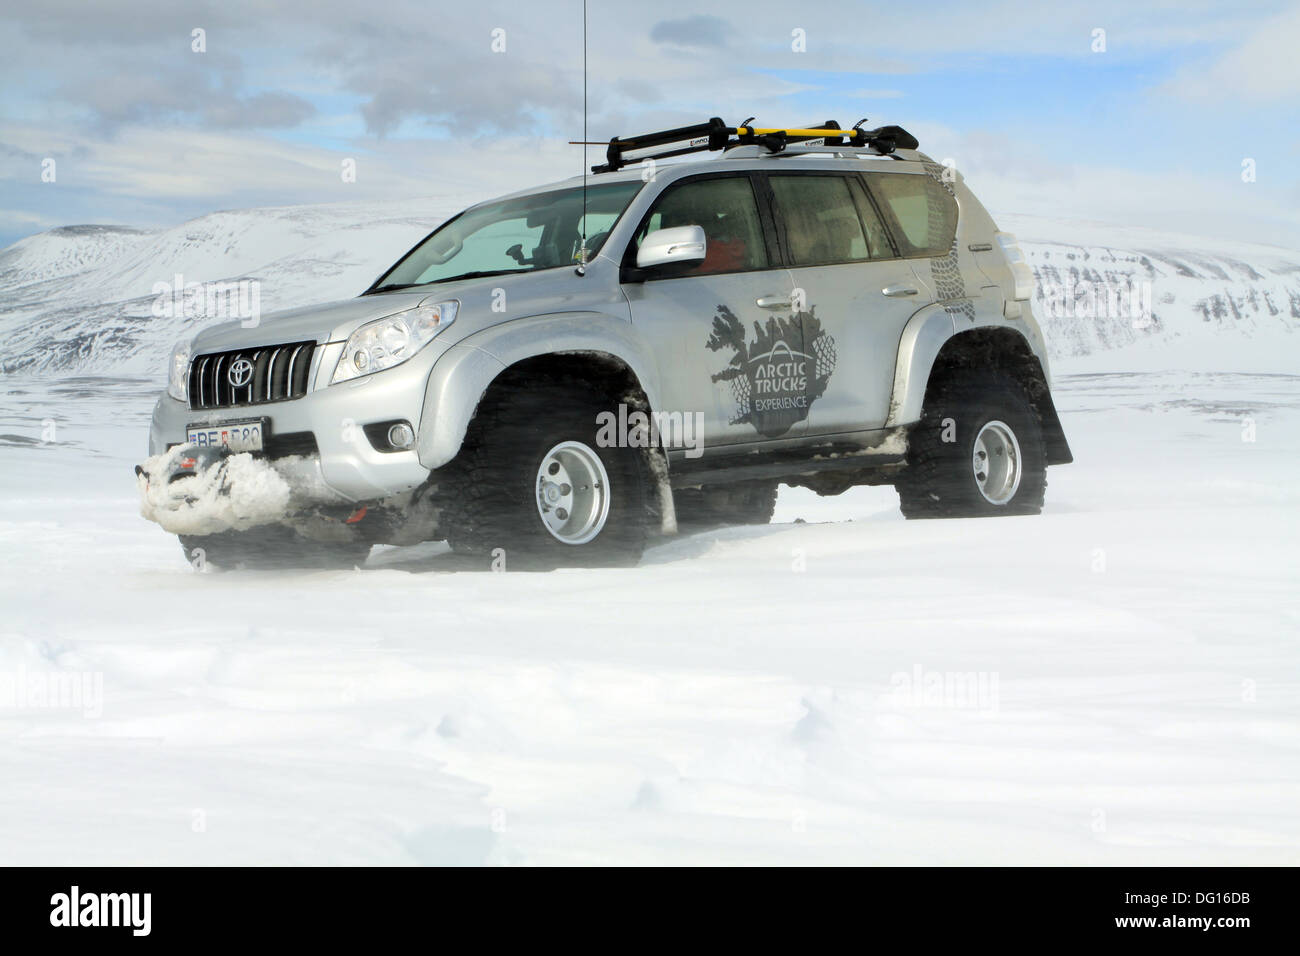 Arctic trucks heavily modified Toyota Landcruiser driving on snow in Iceland Stock Photo